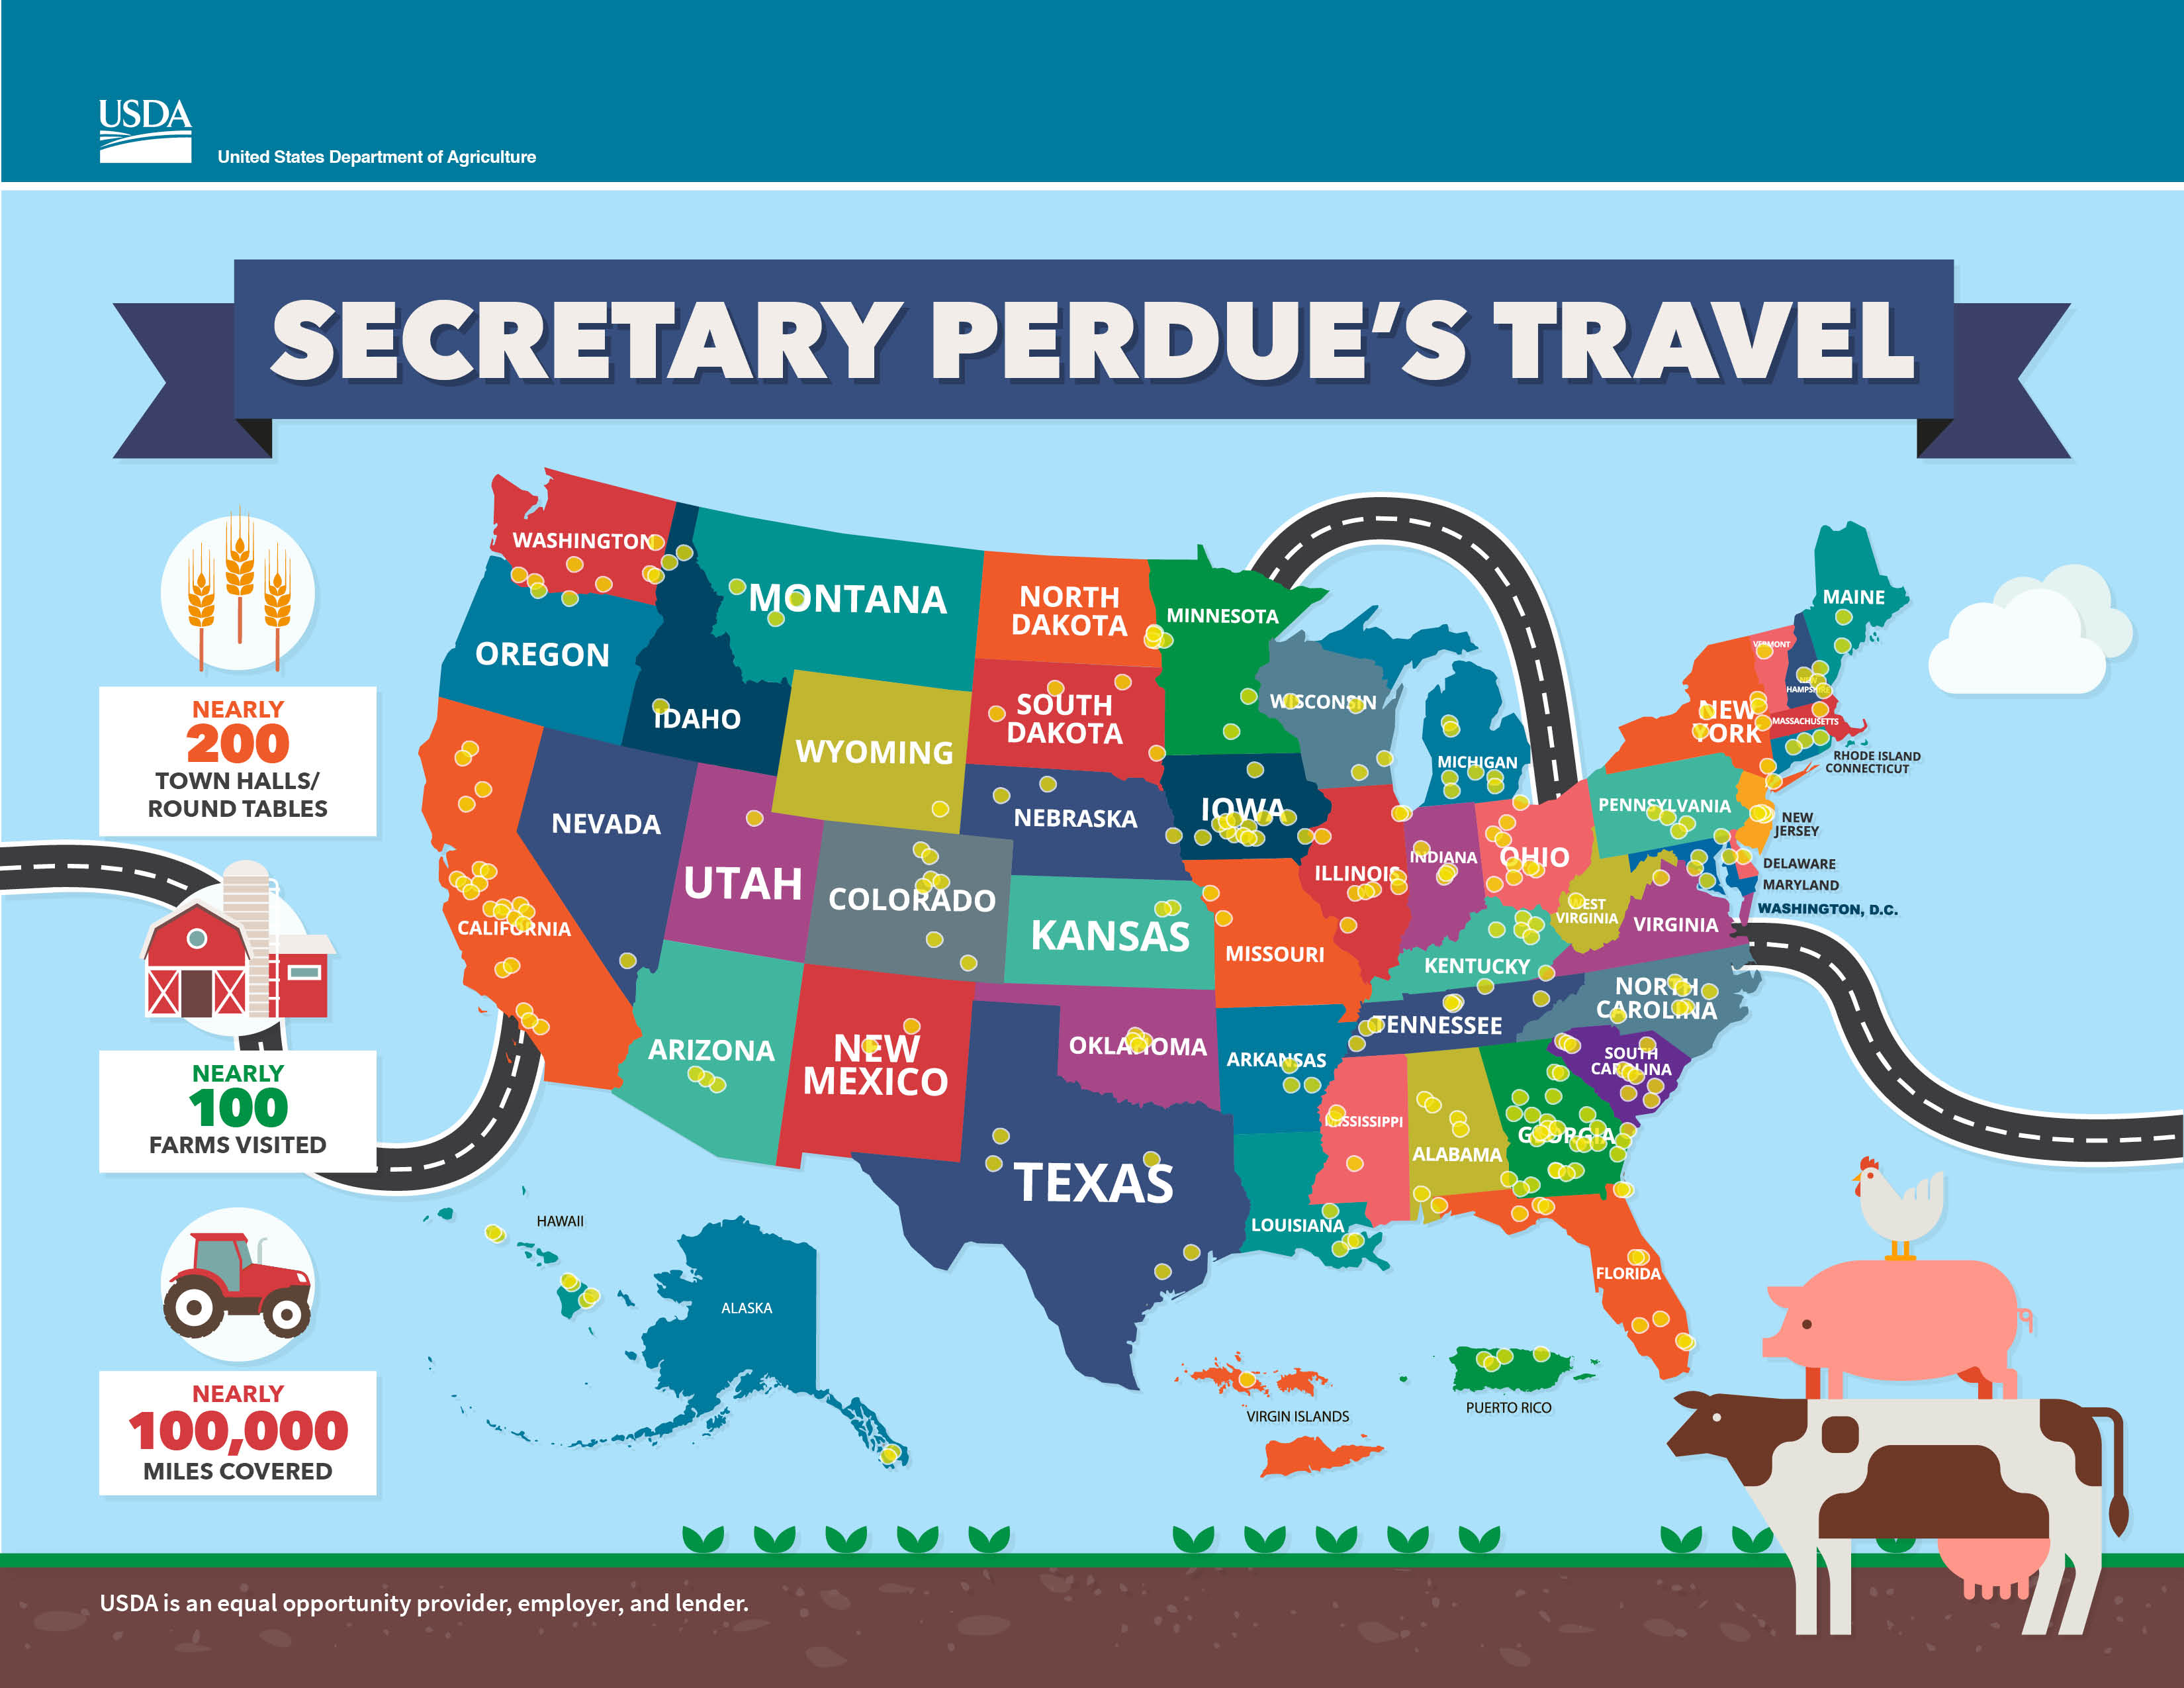 Secretary Perdue's travel map to all 50 states